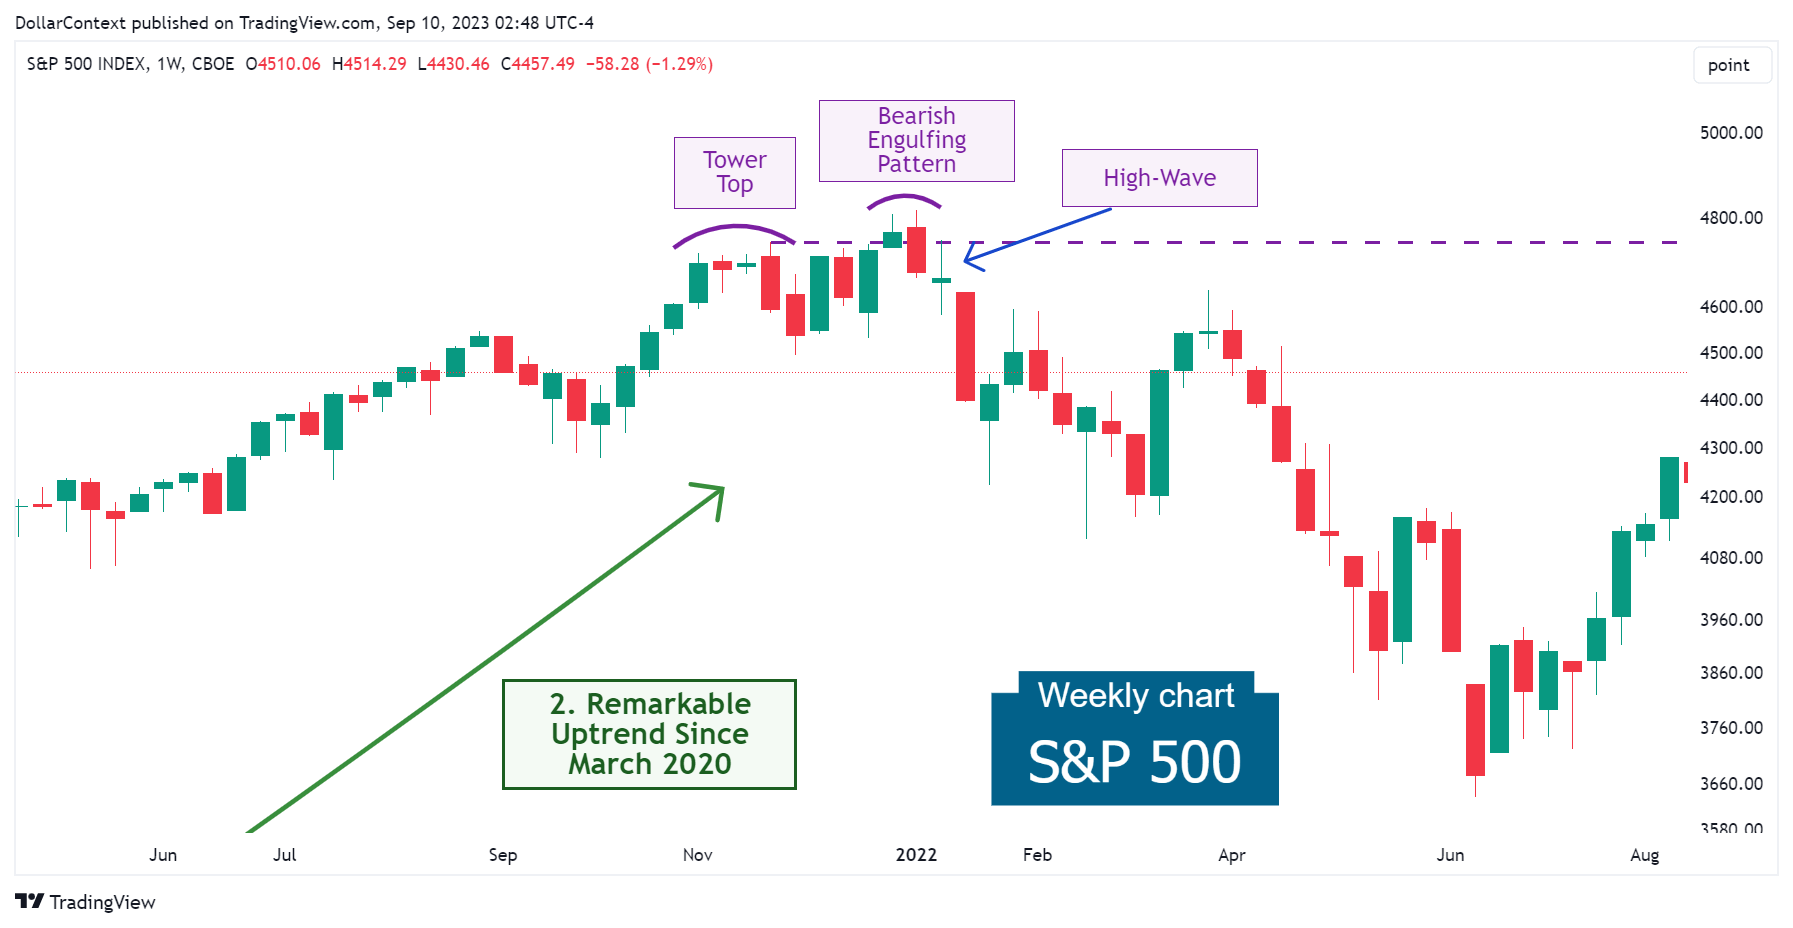 S&P 500: A Series of Candlestick Patterns in late 2021 (Weekly Chart)